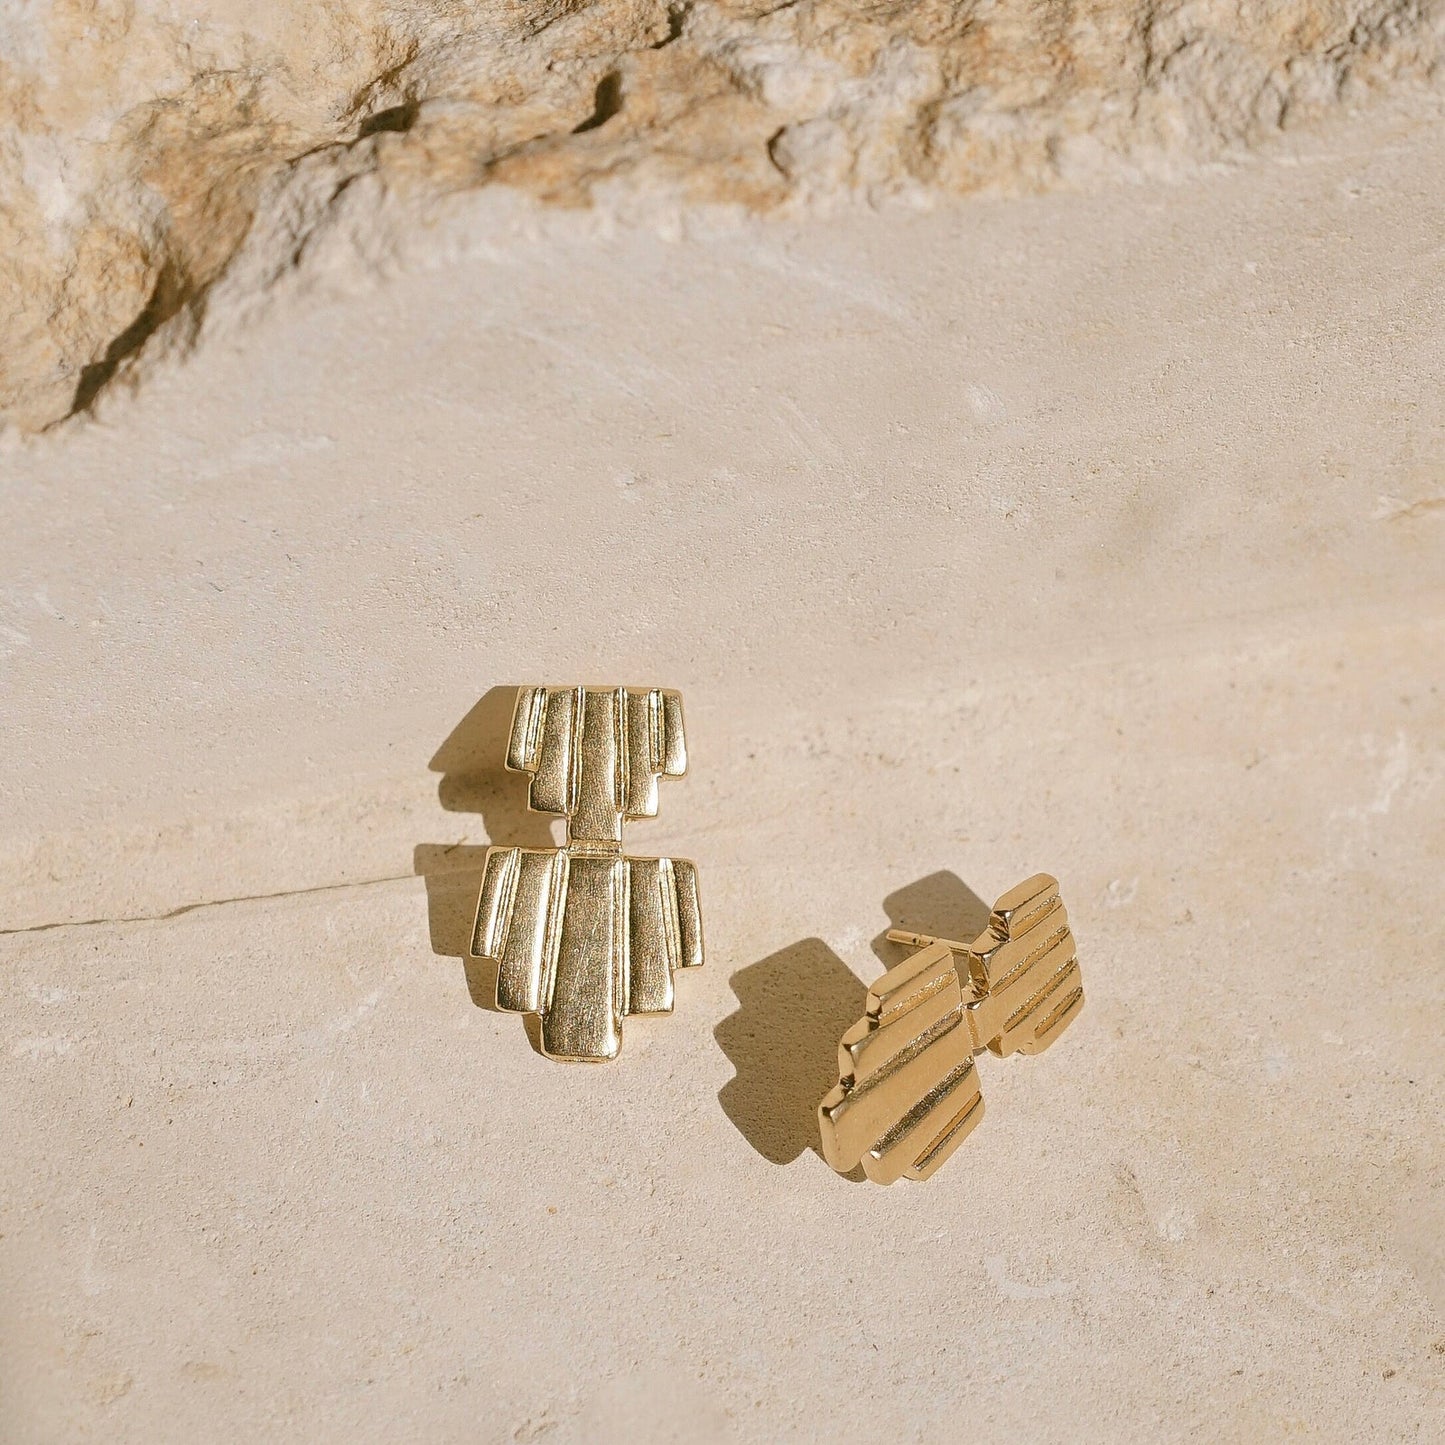 Sculptural structural hand carved stud earrings reminiscent of ancient empires, amulets and totems. Gold vermeil earrings handmade in the Santa Cruz Mountains.